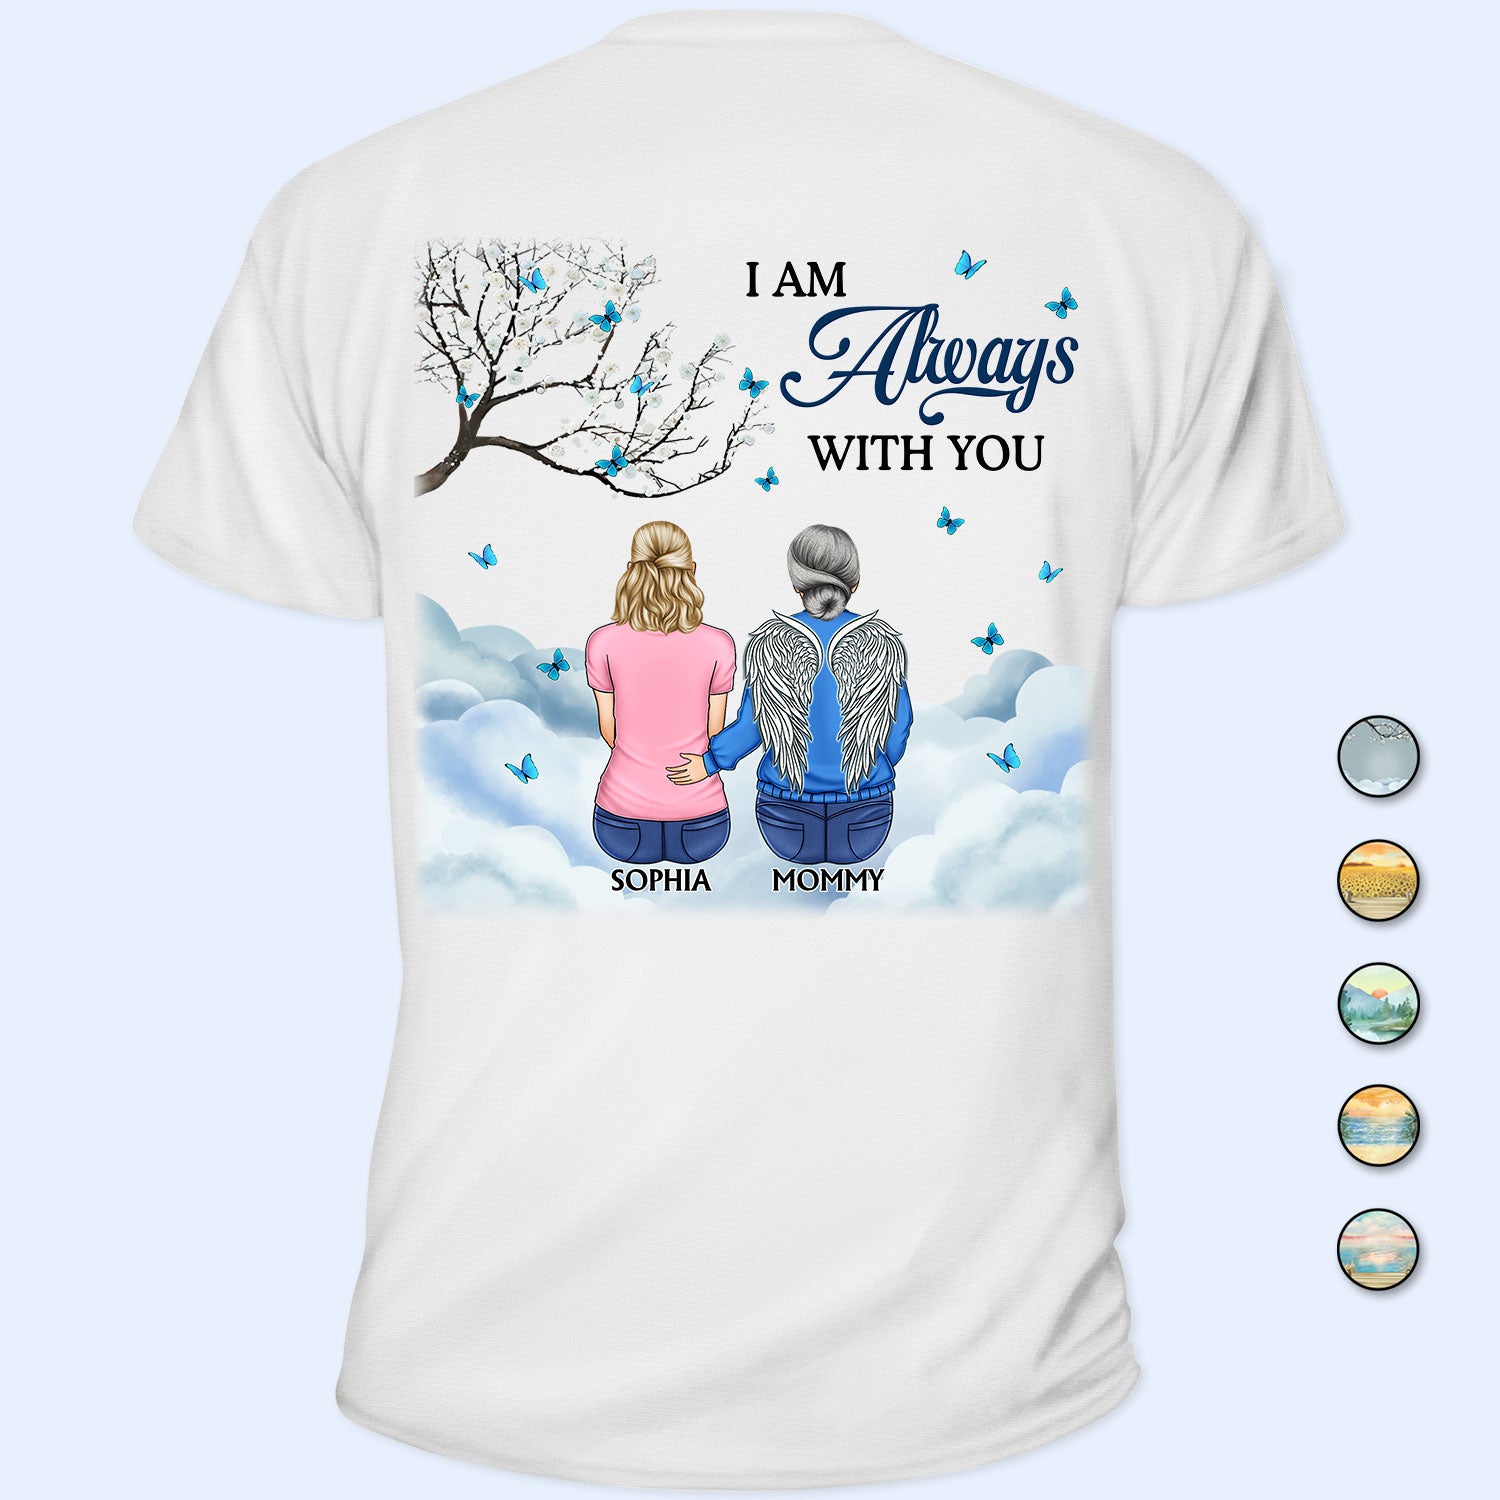 I'm Always With You - Memorial Gift For Family, Friends, Siblings - Personalized T Shirt